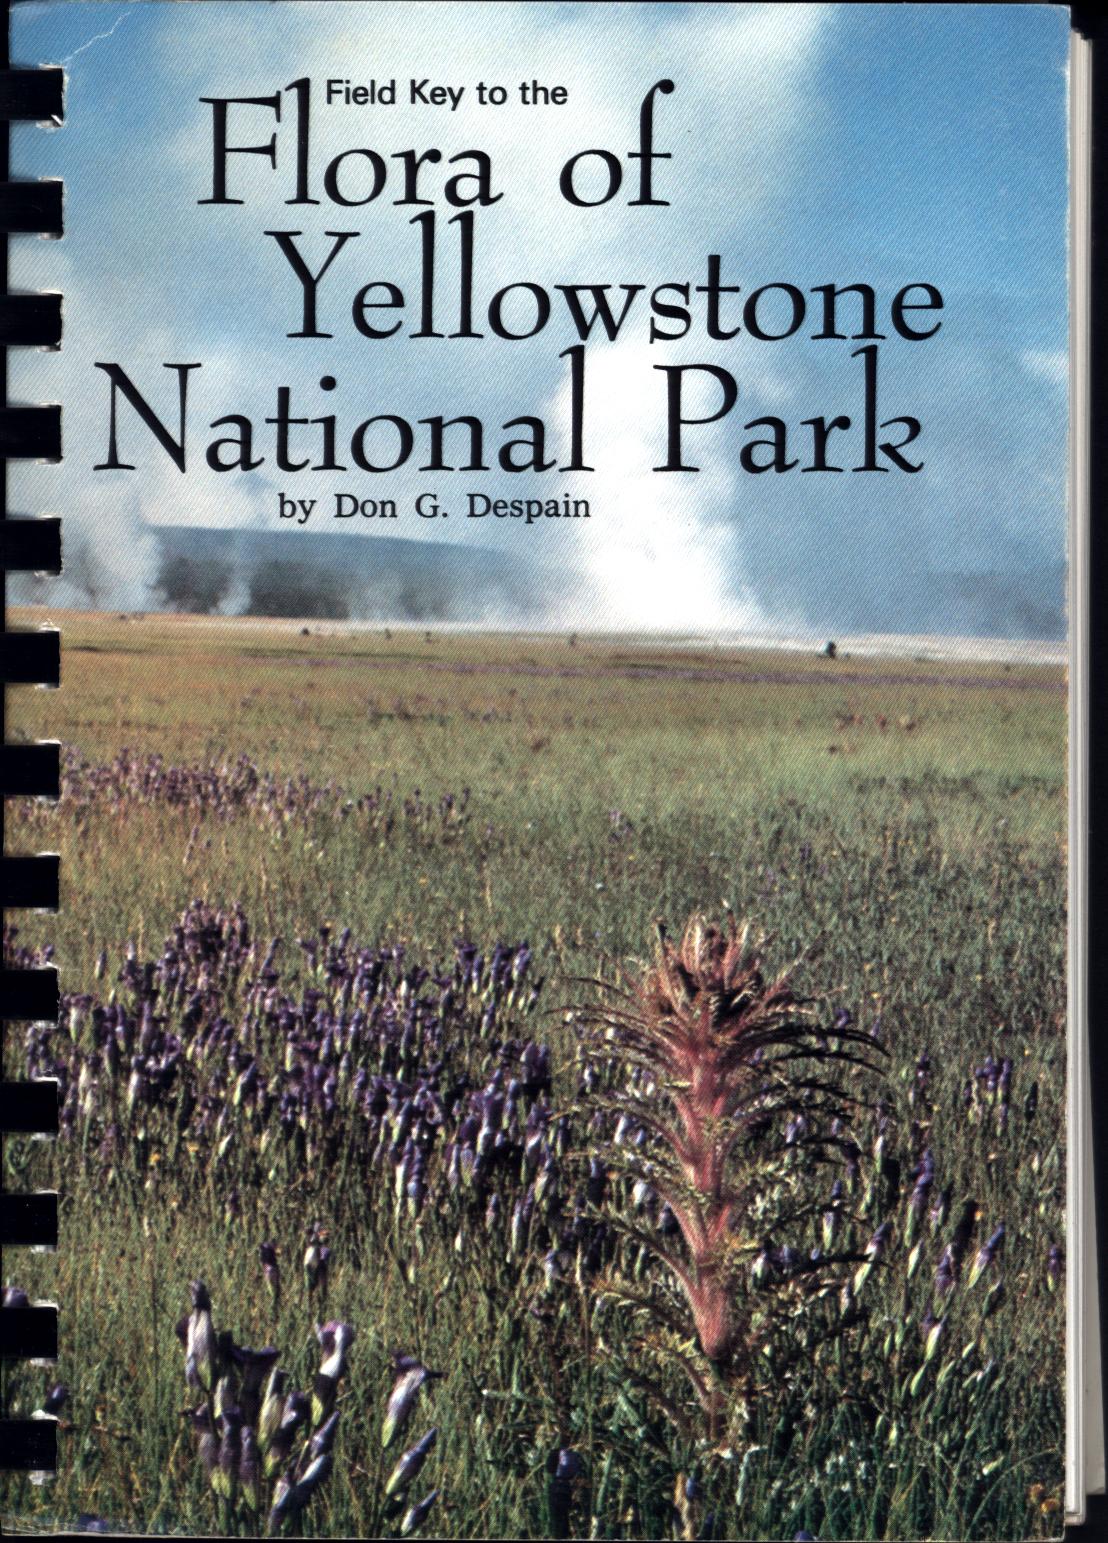 FIELD KEY TO THE FLORA OF YELLOWSTONE NATIONAL PARK. 